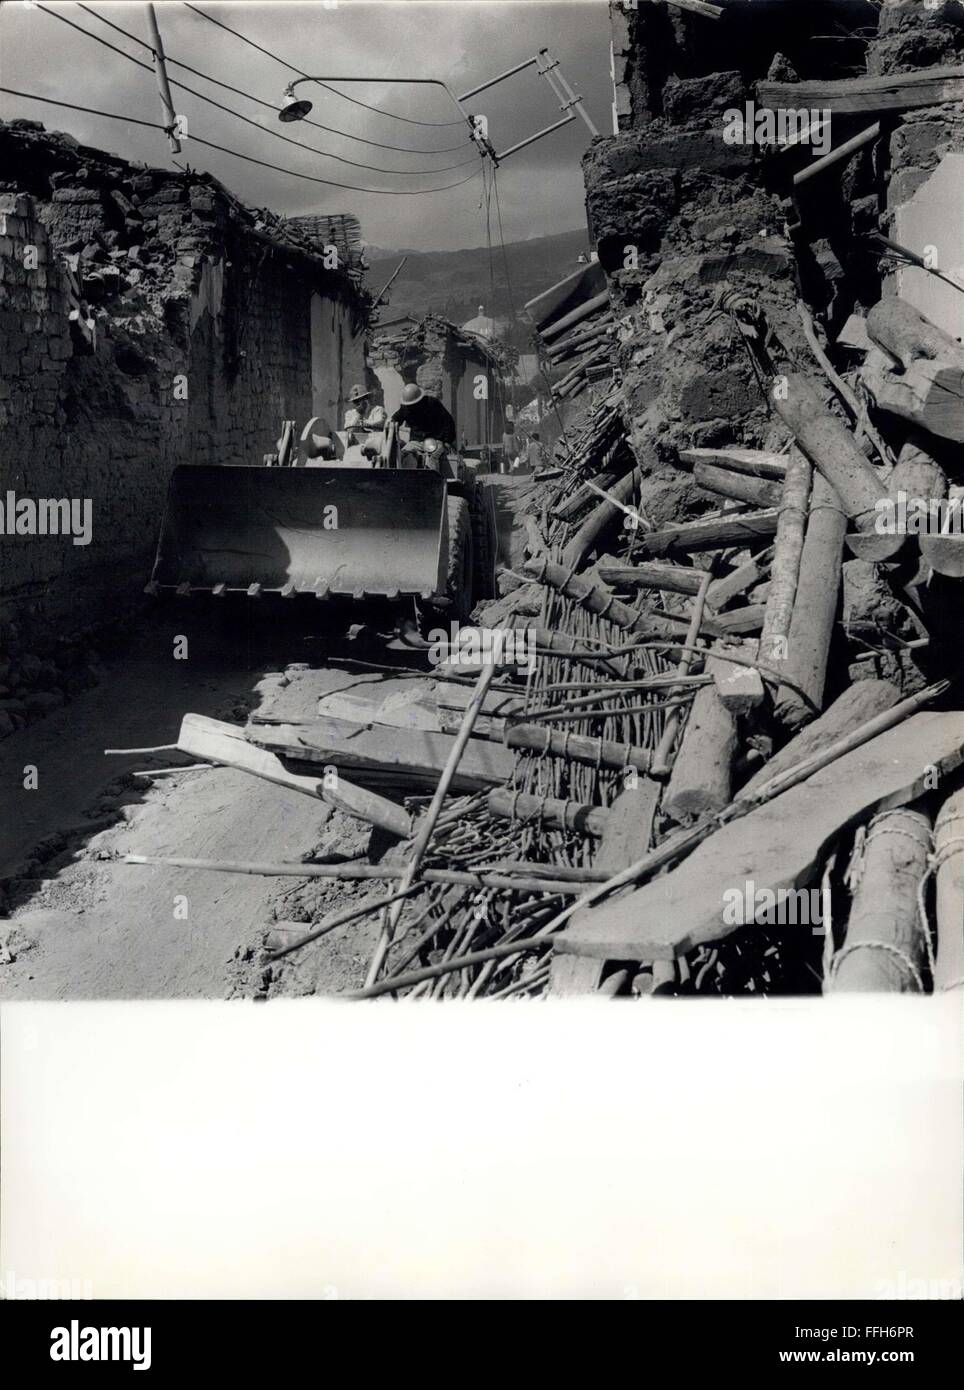 1970 - Peruvian earthquake May 31, 1970 Heavy equipment used in cleaning street from debris in Huarez. © Keystone Pictures USA/ZUMAPRESS.com/Alamy Live News Stock Photo